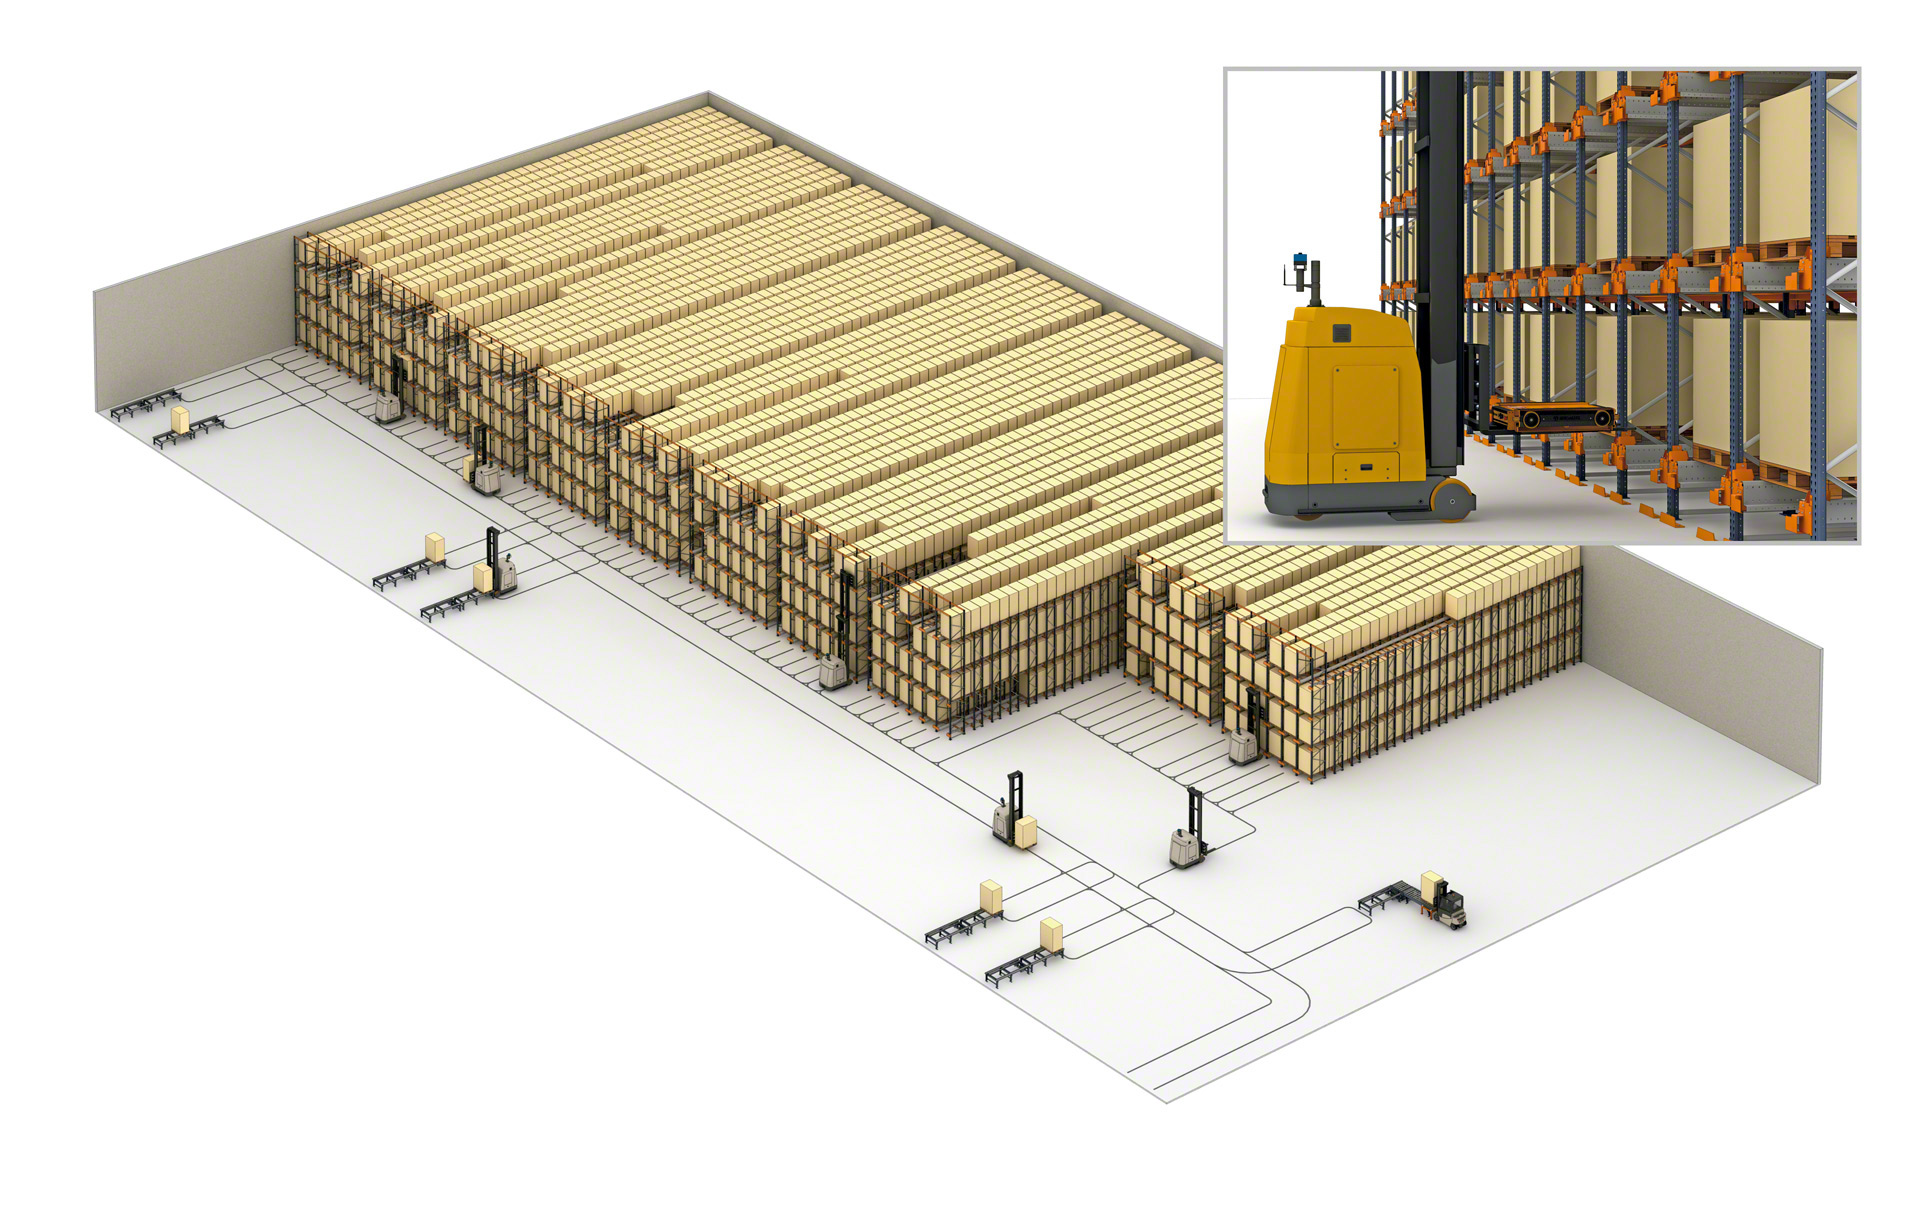 AGVs, which use a wire-guided system, can also be integrated into the semi-automatic Pallet Shuttle system